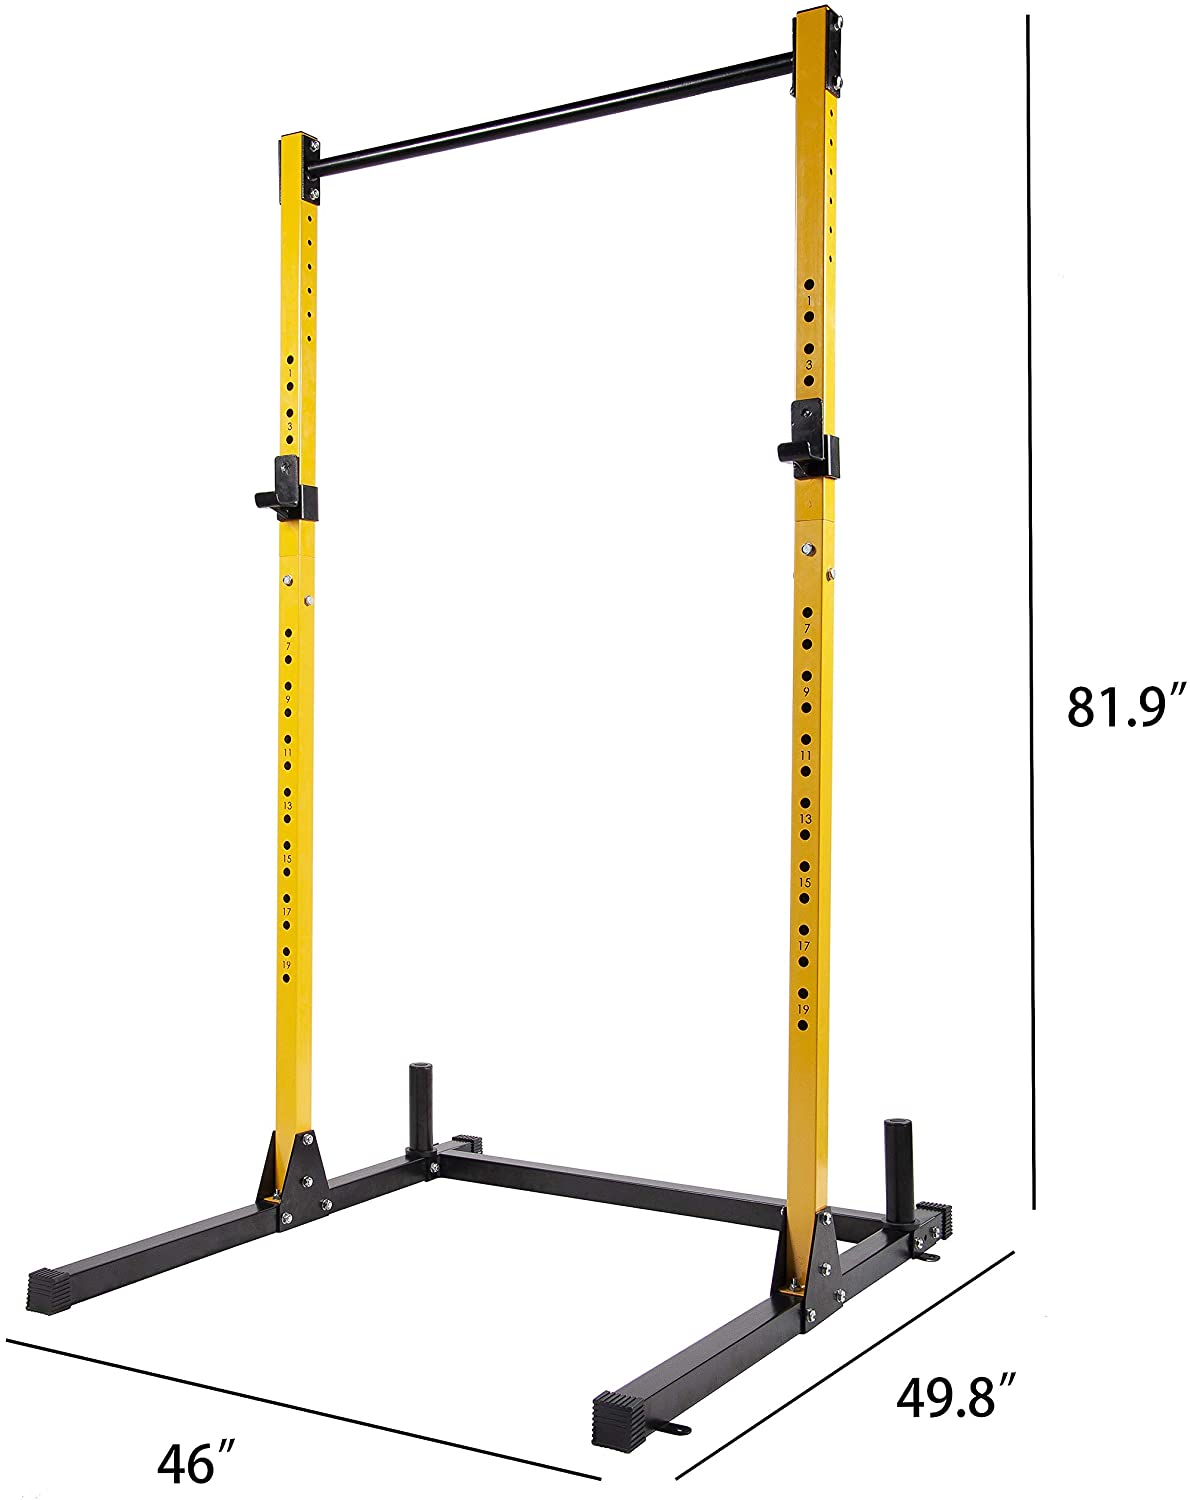 Gym; Home Gym; Garage Gym; Health; Exercise; Exercise Equipment; Fitness; Strength & Conditioning; Strength Training; Attachments; Accessories; Squat Stand; Squat Rack; Cable Machine; Cable Attachments; Cable Pulley System